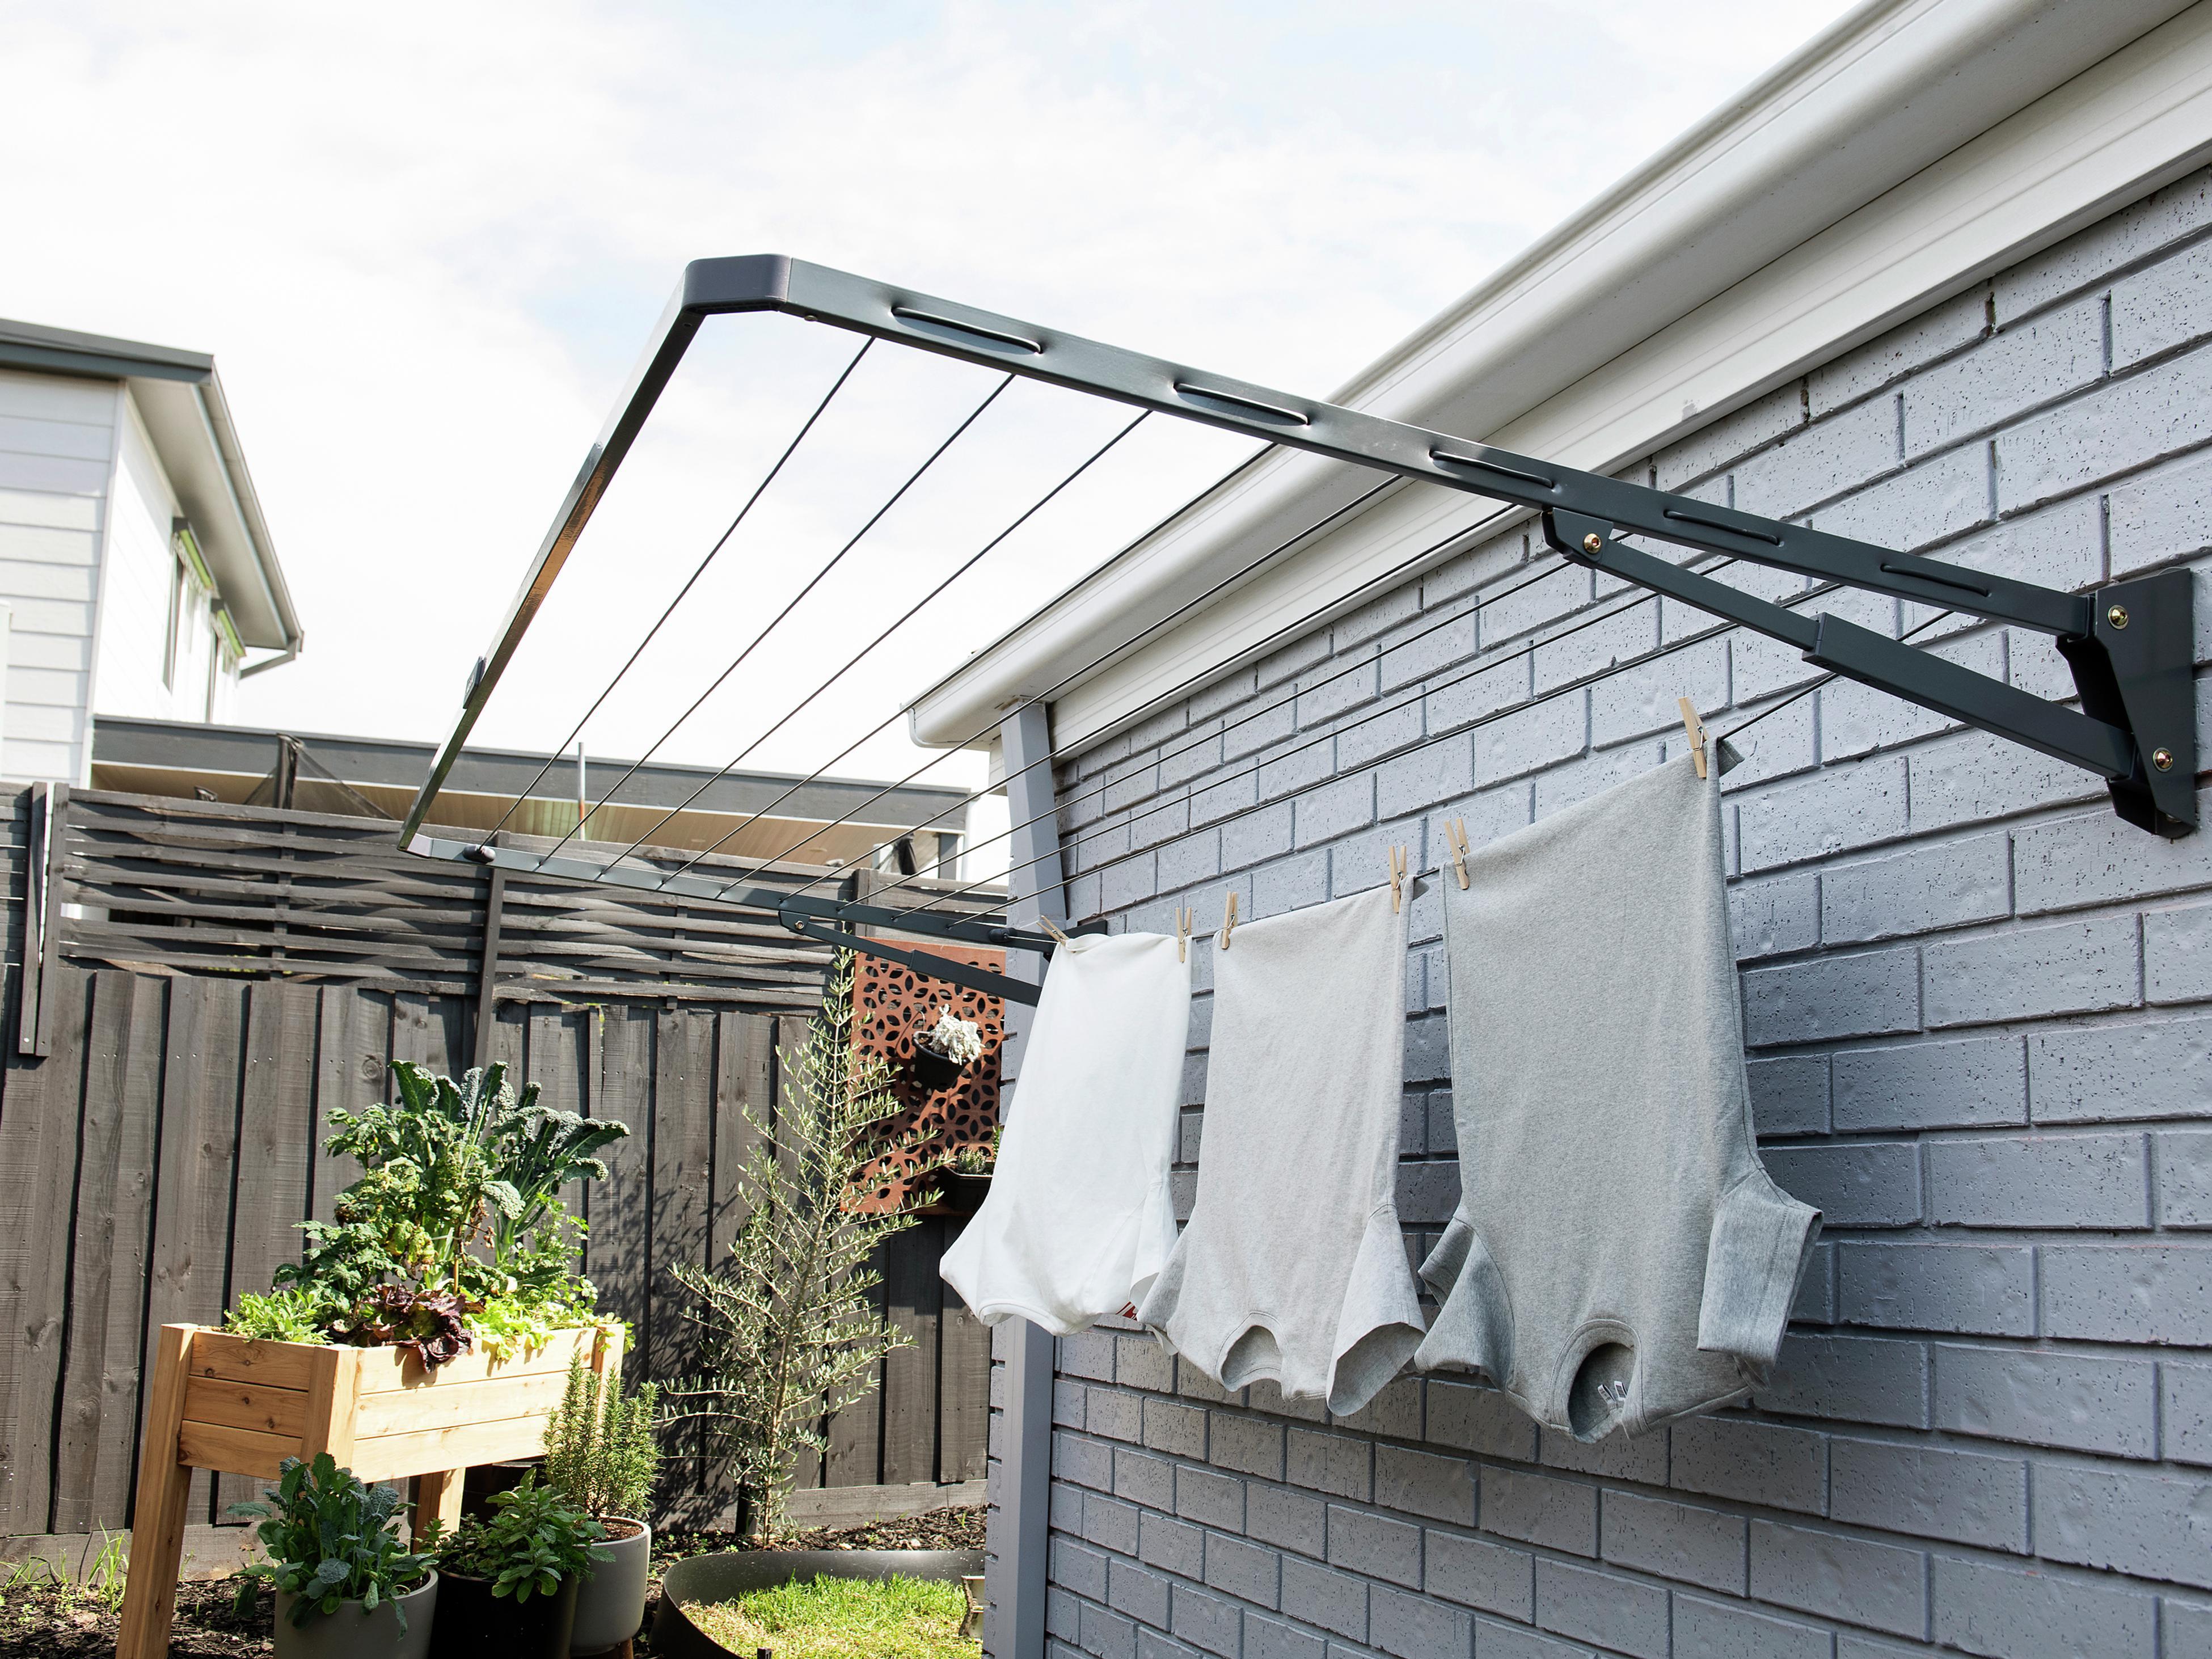 11 DIY Clothesline Ideas For Inside And Outside, 60% OFF